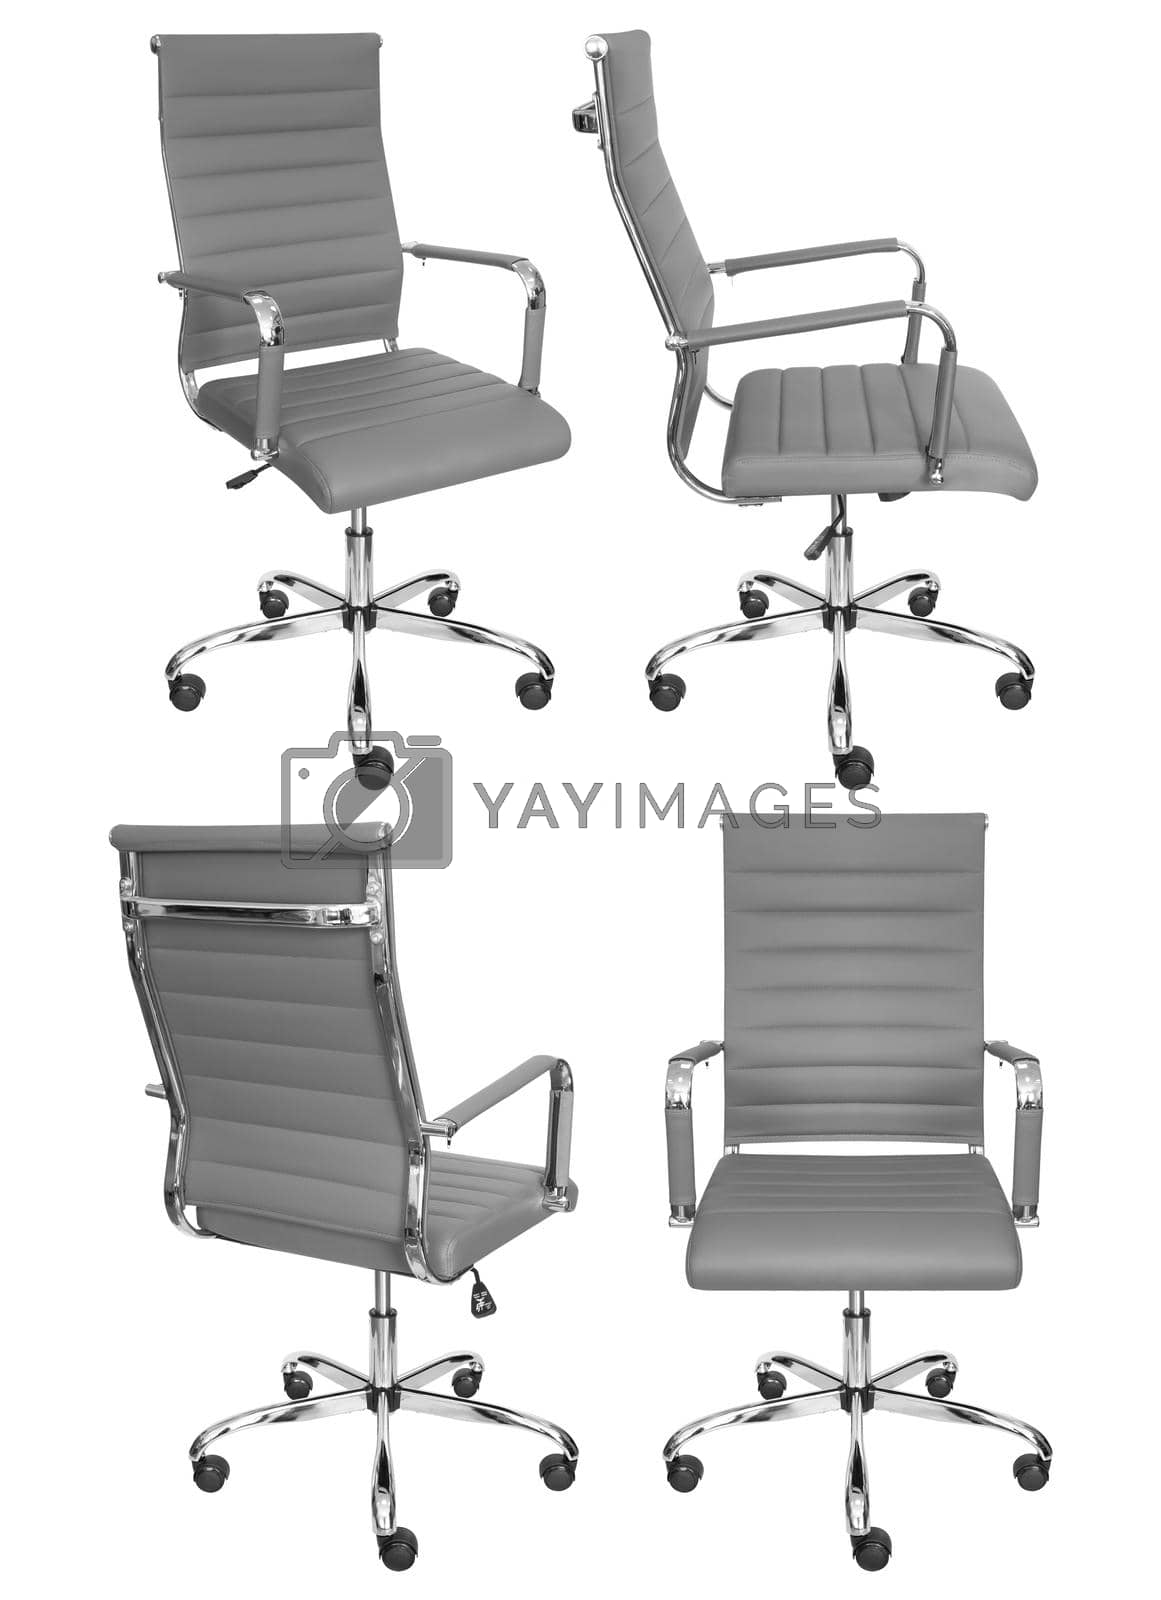 Royalty free image of Office chair by Andermeow